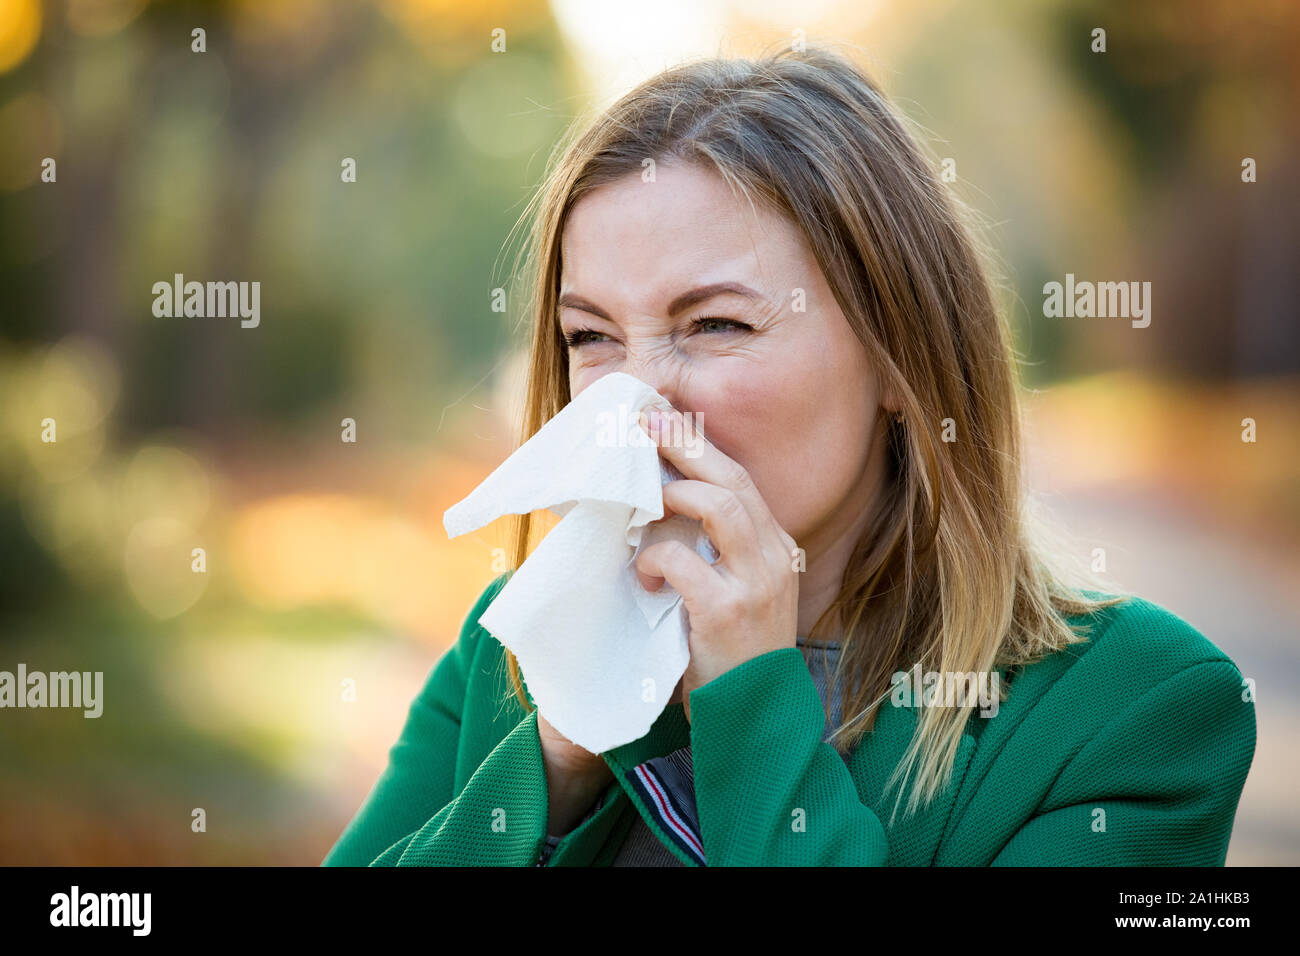 Sick young woman with cold and flu standing outdoors, sneezing, wiping nose with handkerchief, coughing. Autumn street background Stock Photo